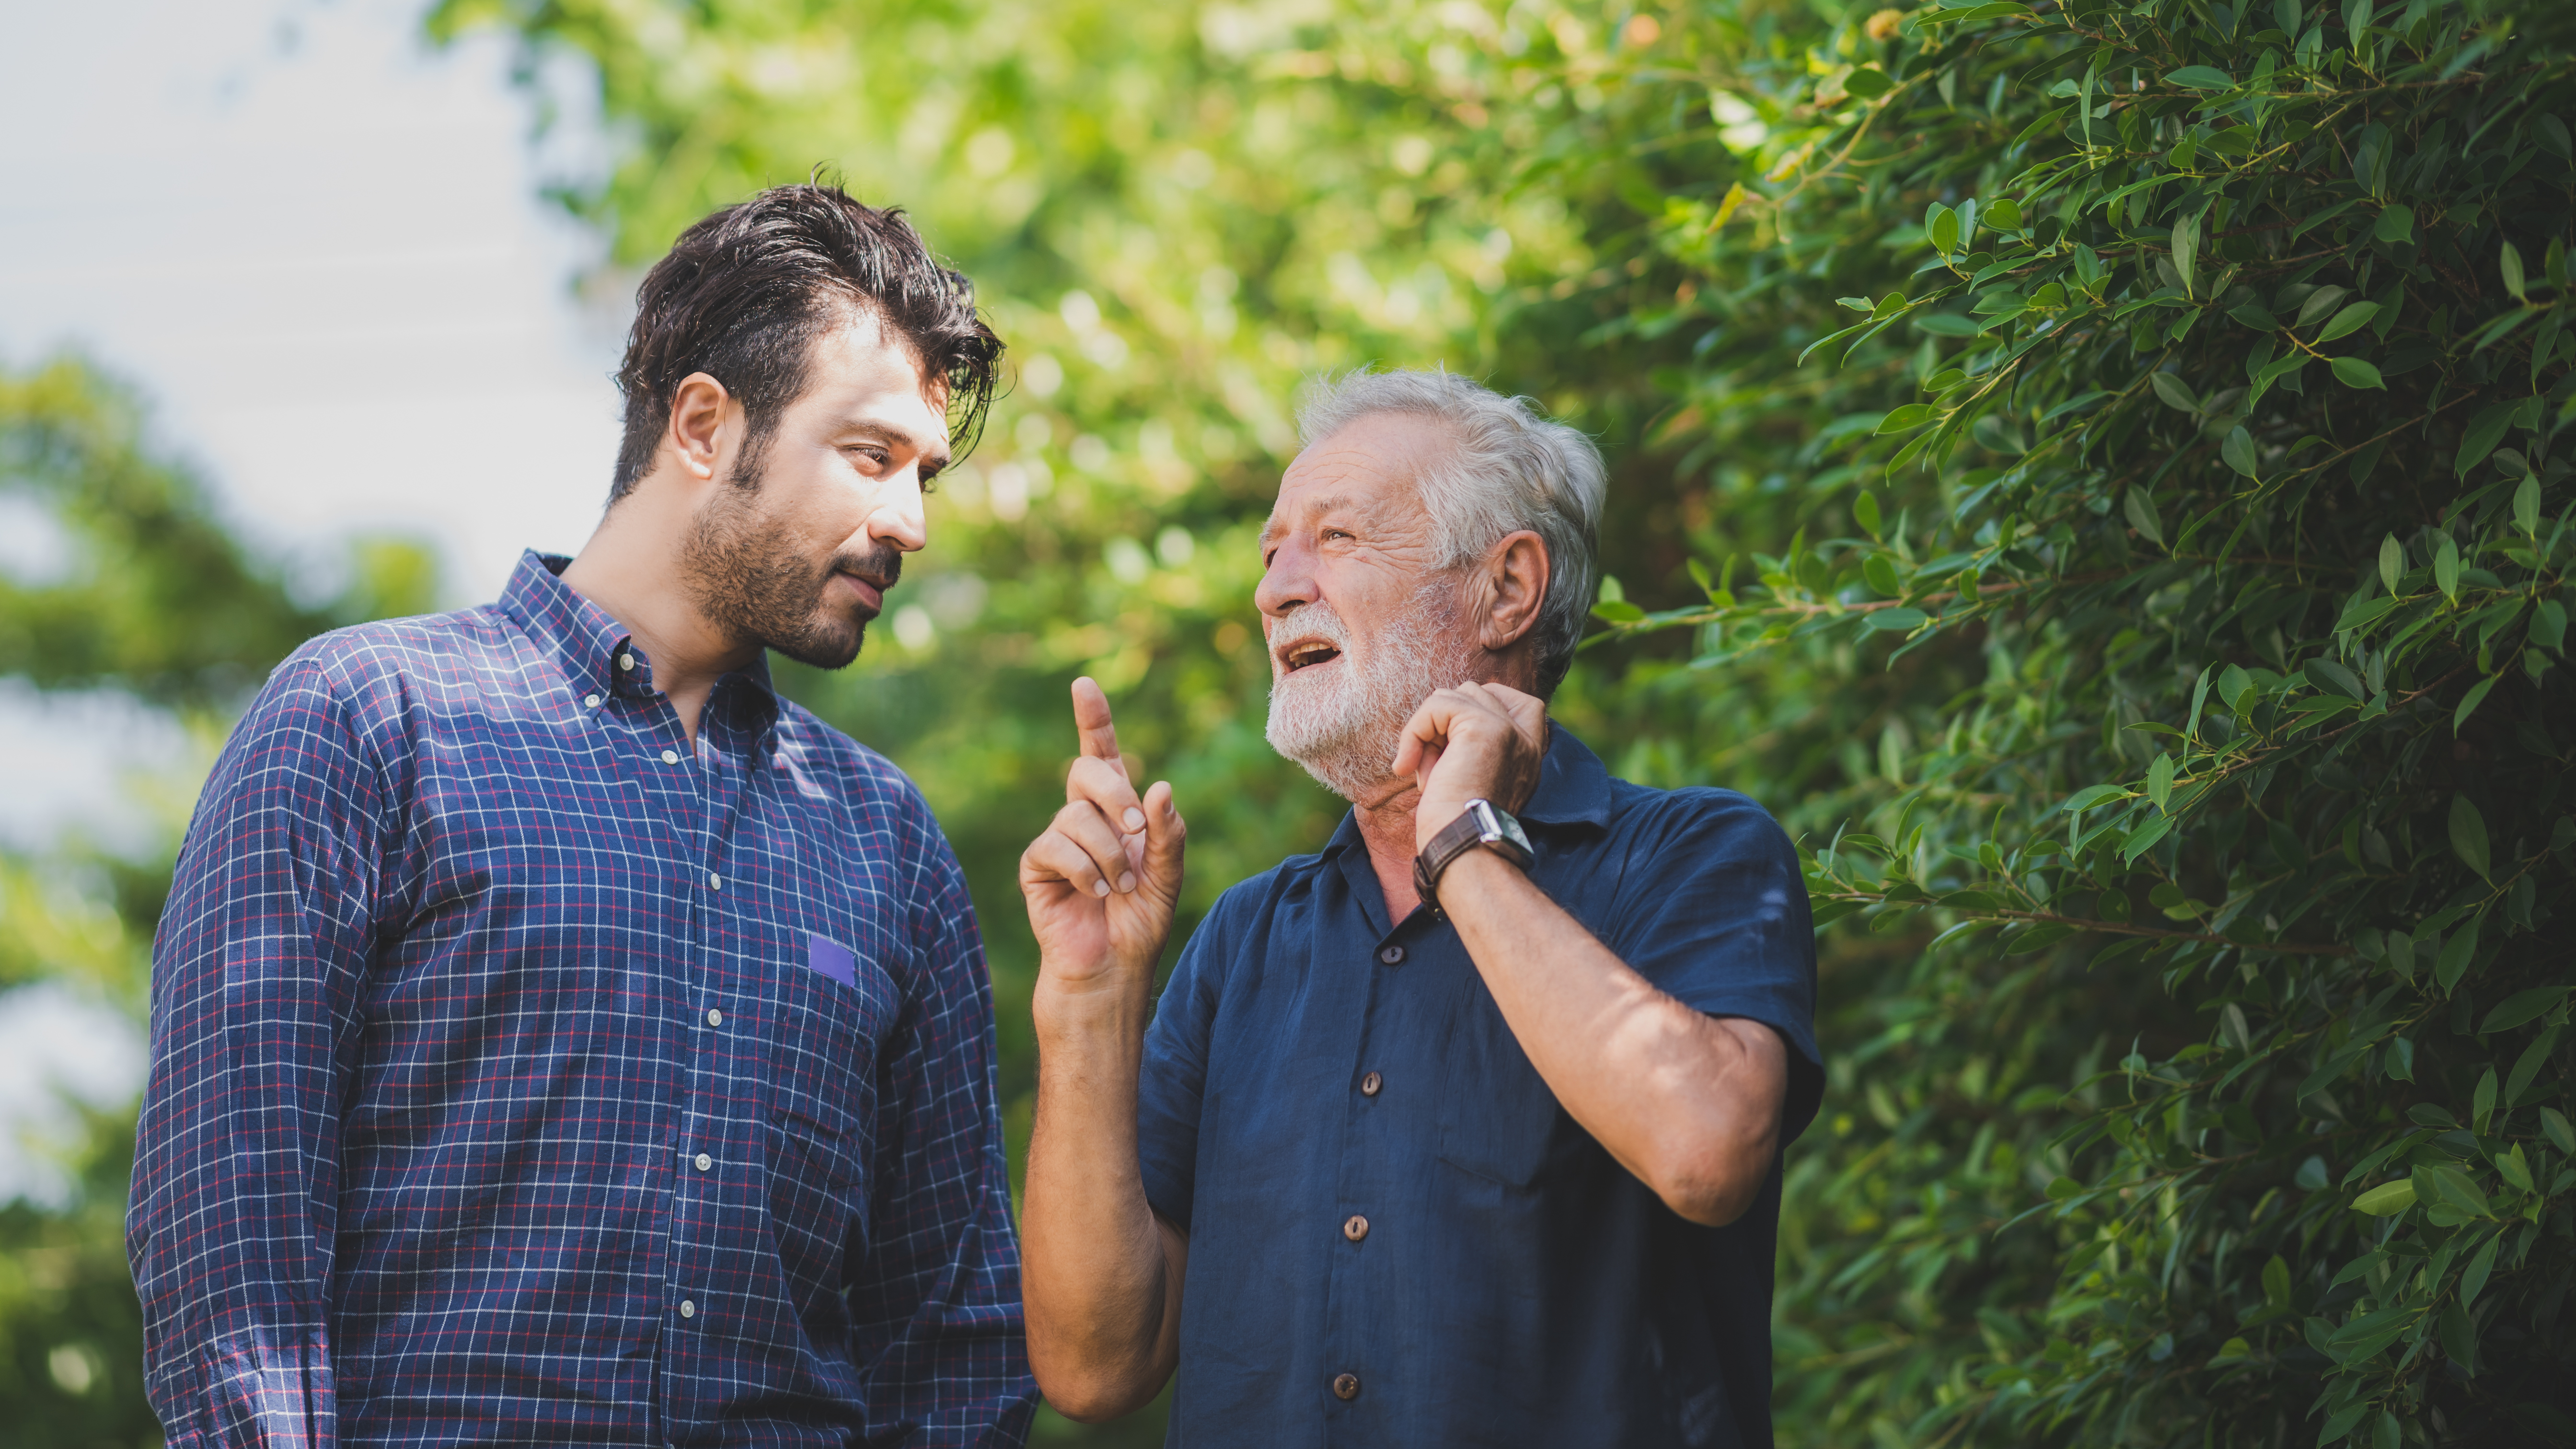 An older man talking to a young man | Source: Shutterstock